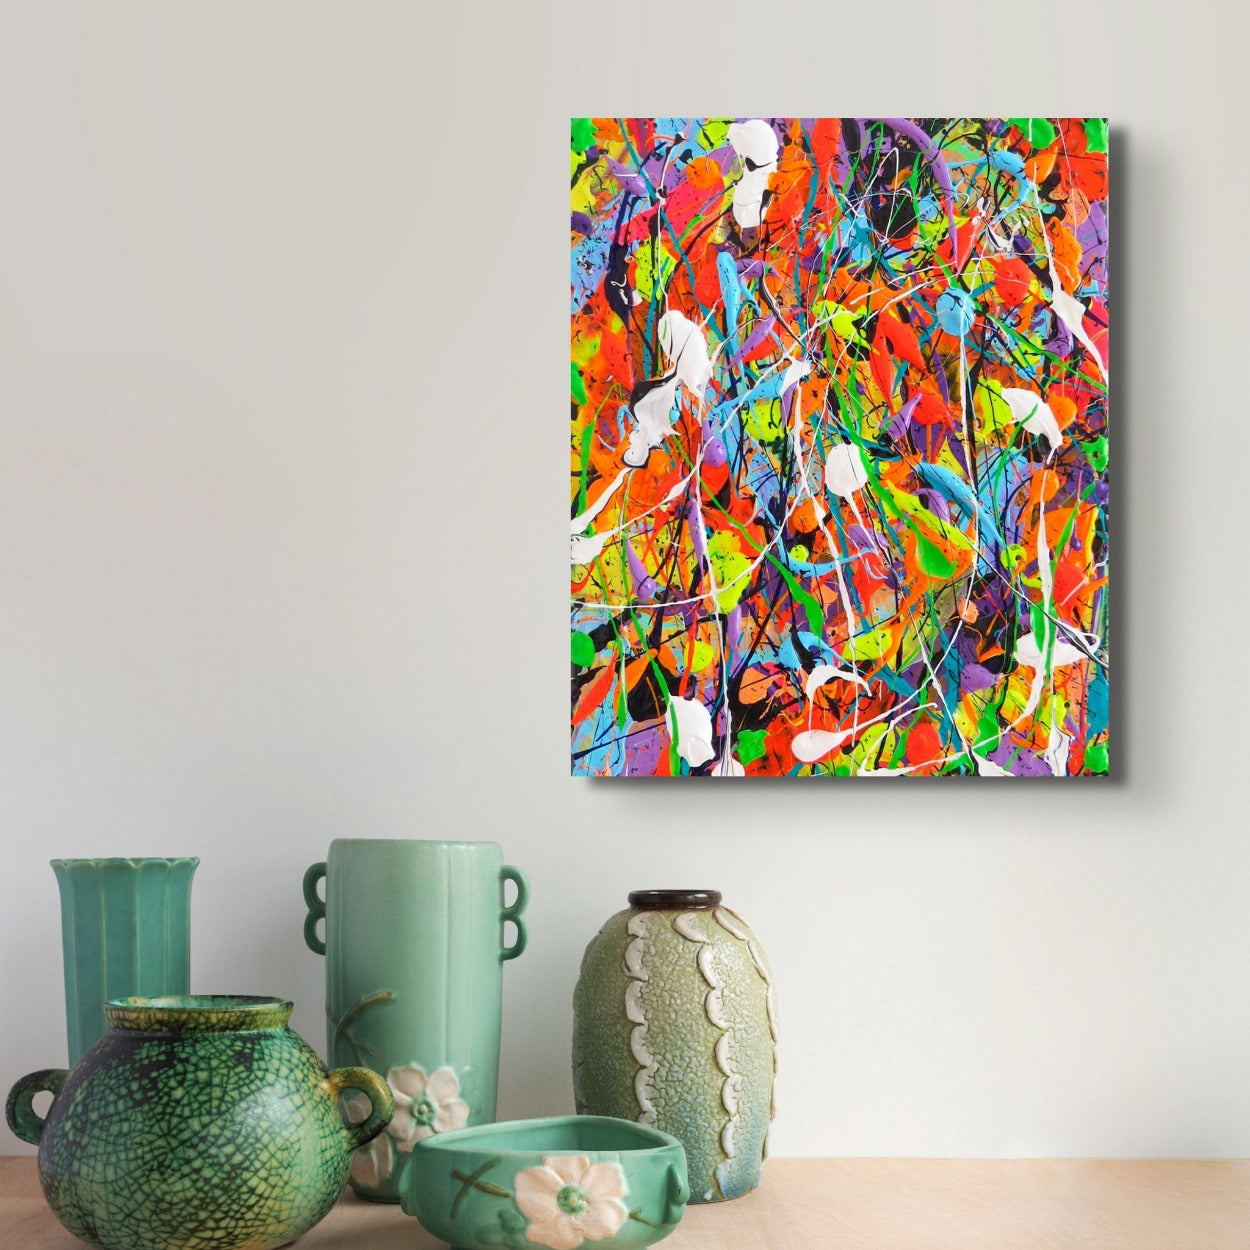 Night at the carnival, original, bright, textured abstract painting seen hanging above green vases. Art by Bridget Bradley, contemporary Abstract Artist Australia